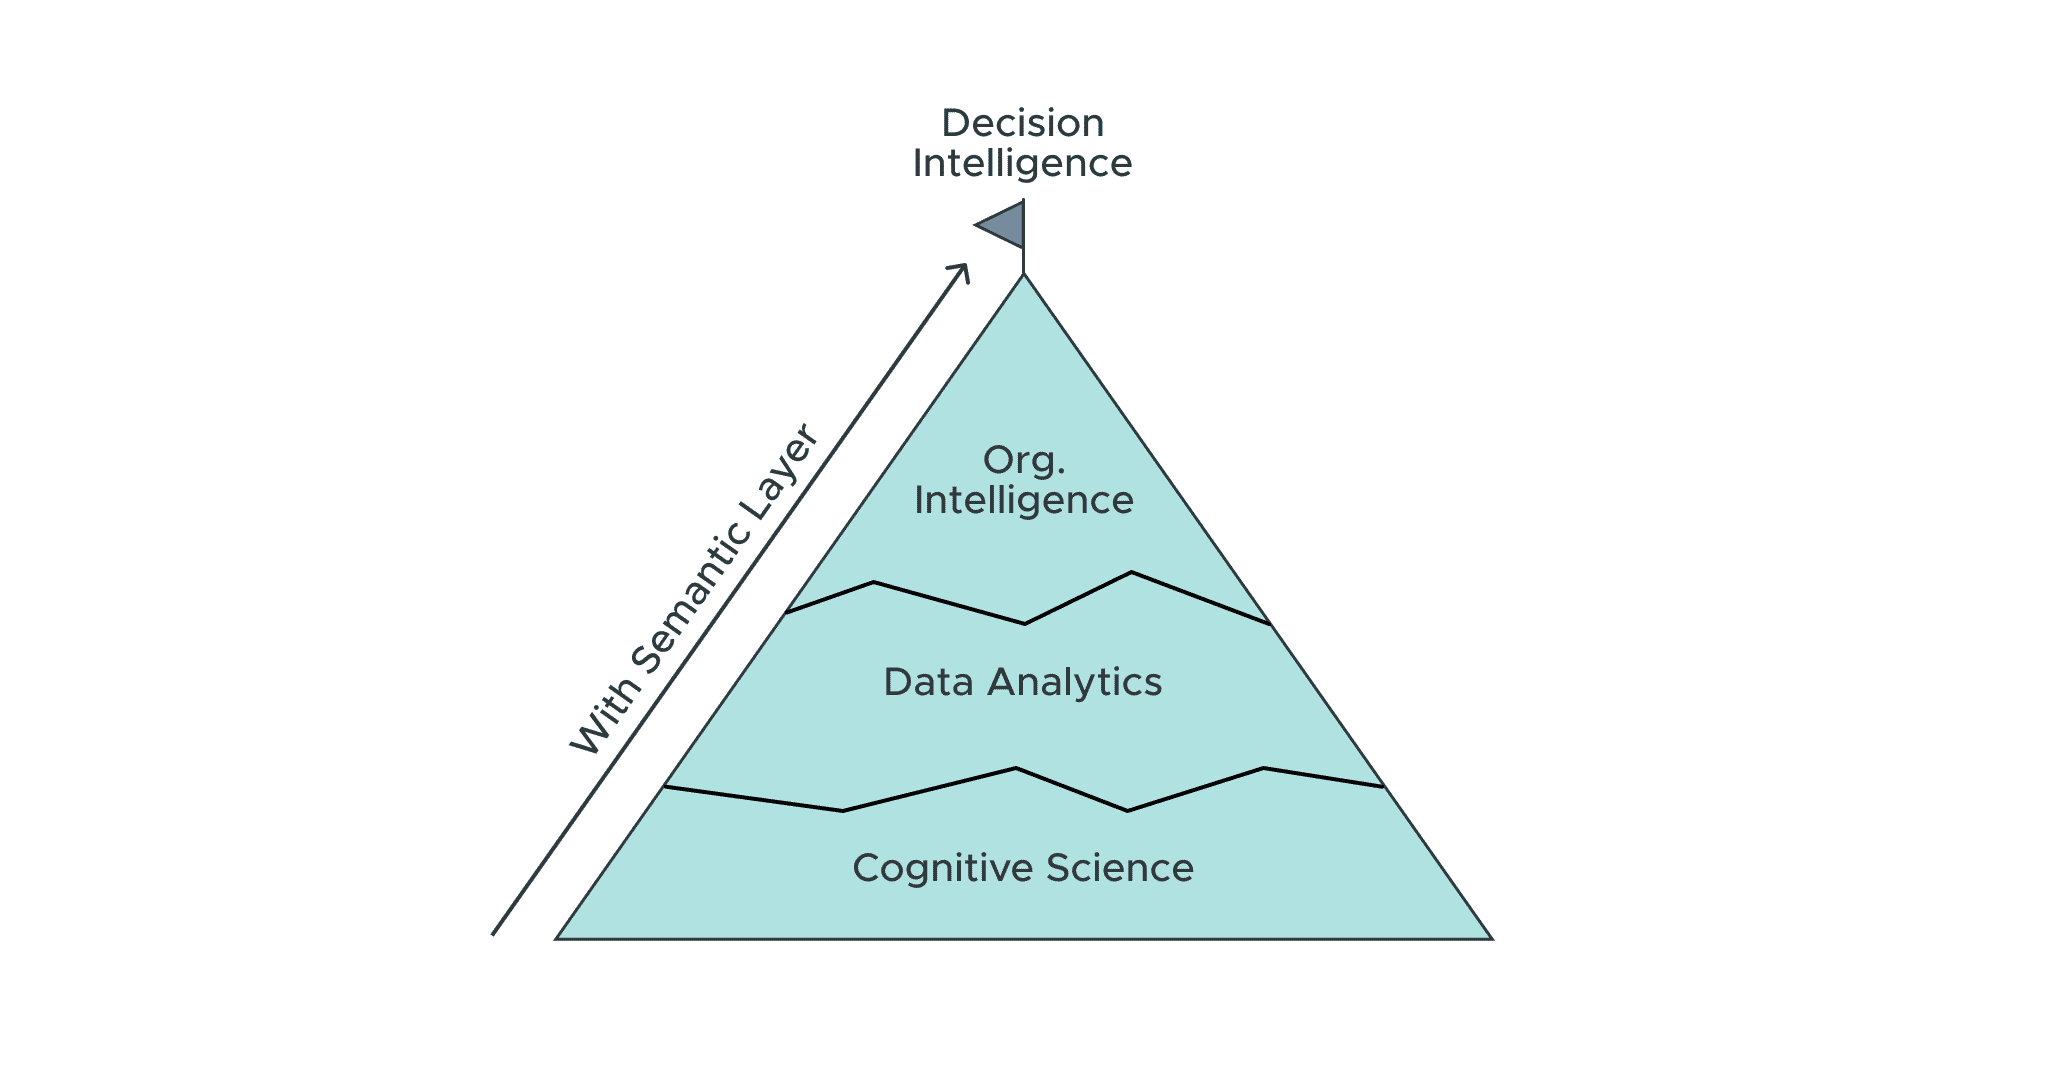 Implement Decision Intelligence with a Semantic Layer